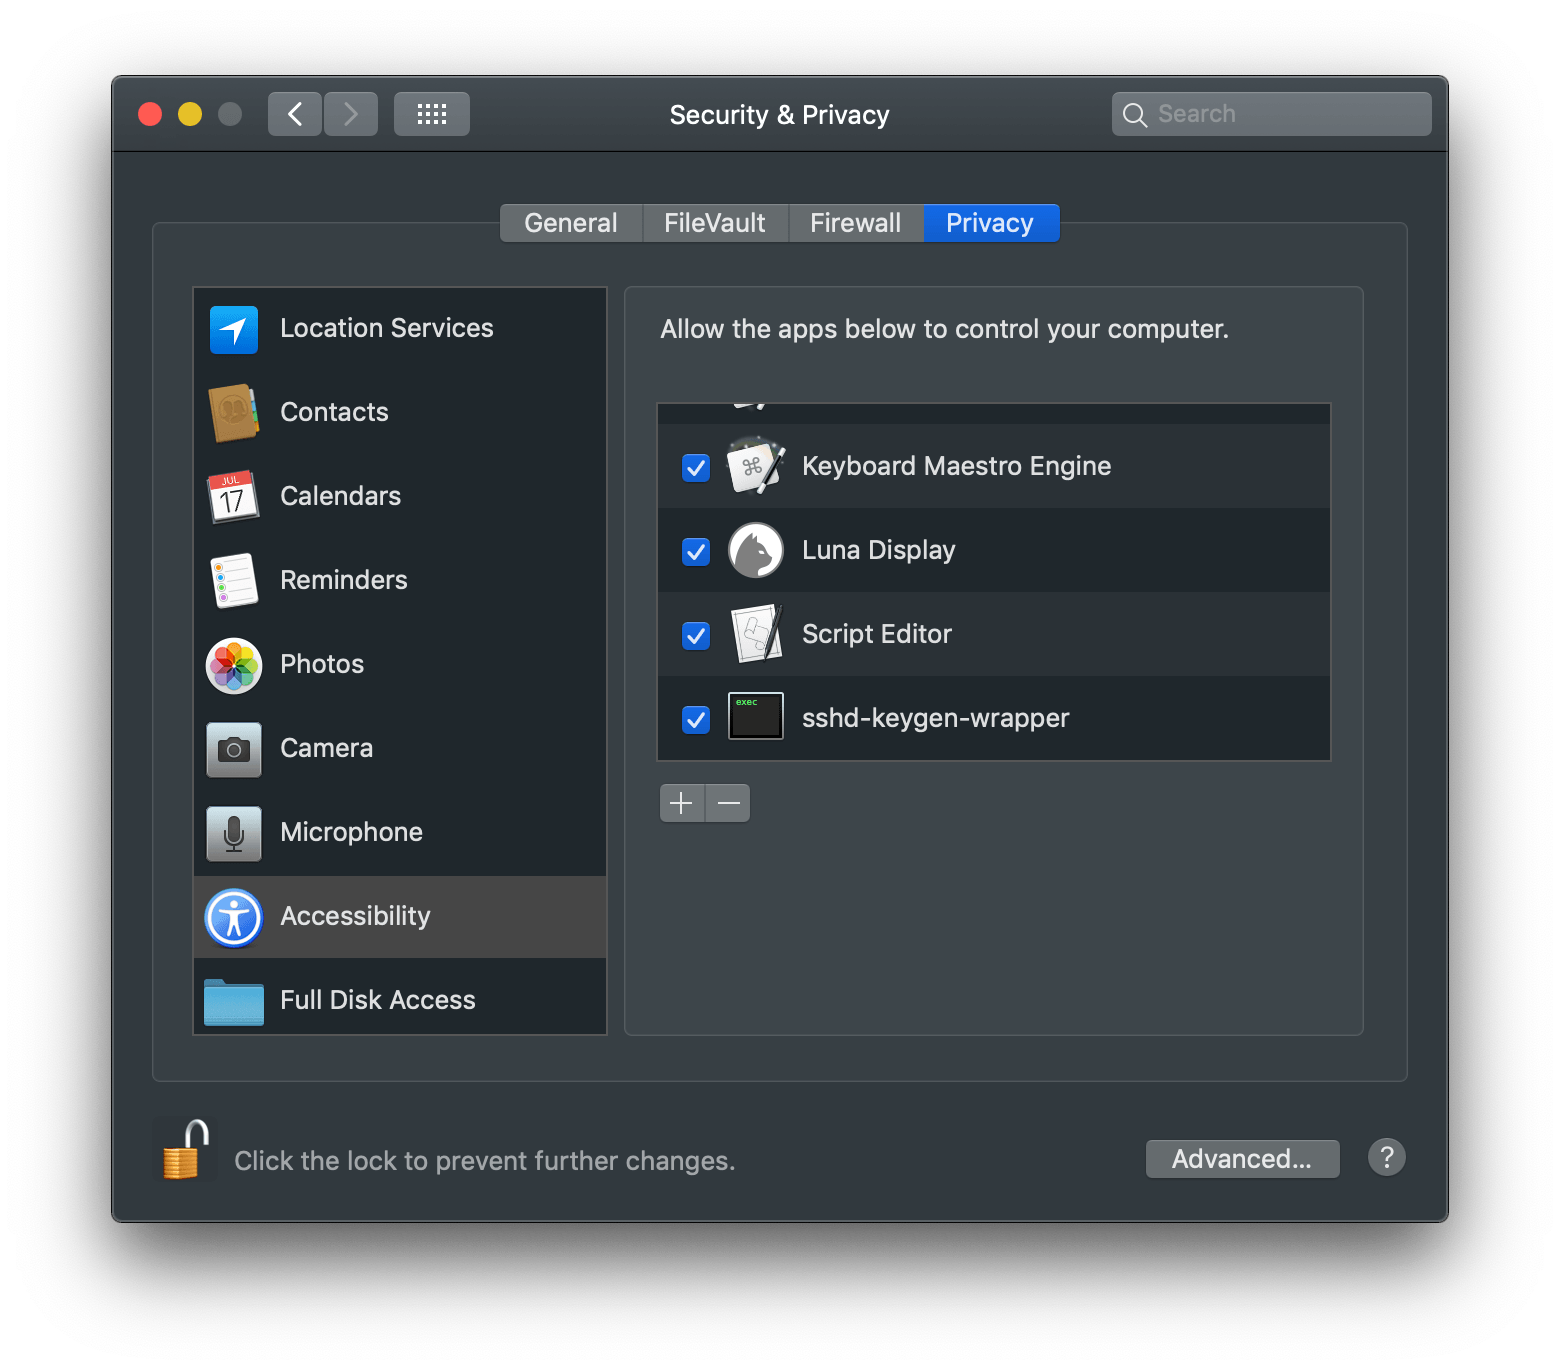 SSH is an example of a process started by Shortcuts that requires authorization on Mojave.